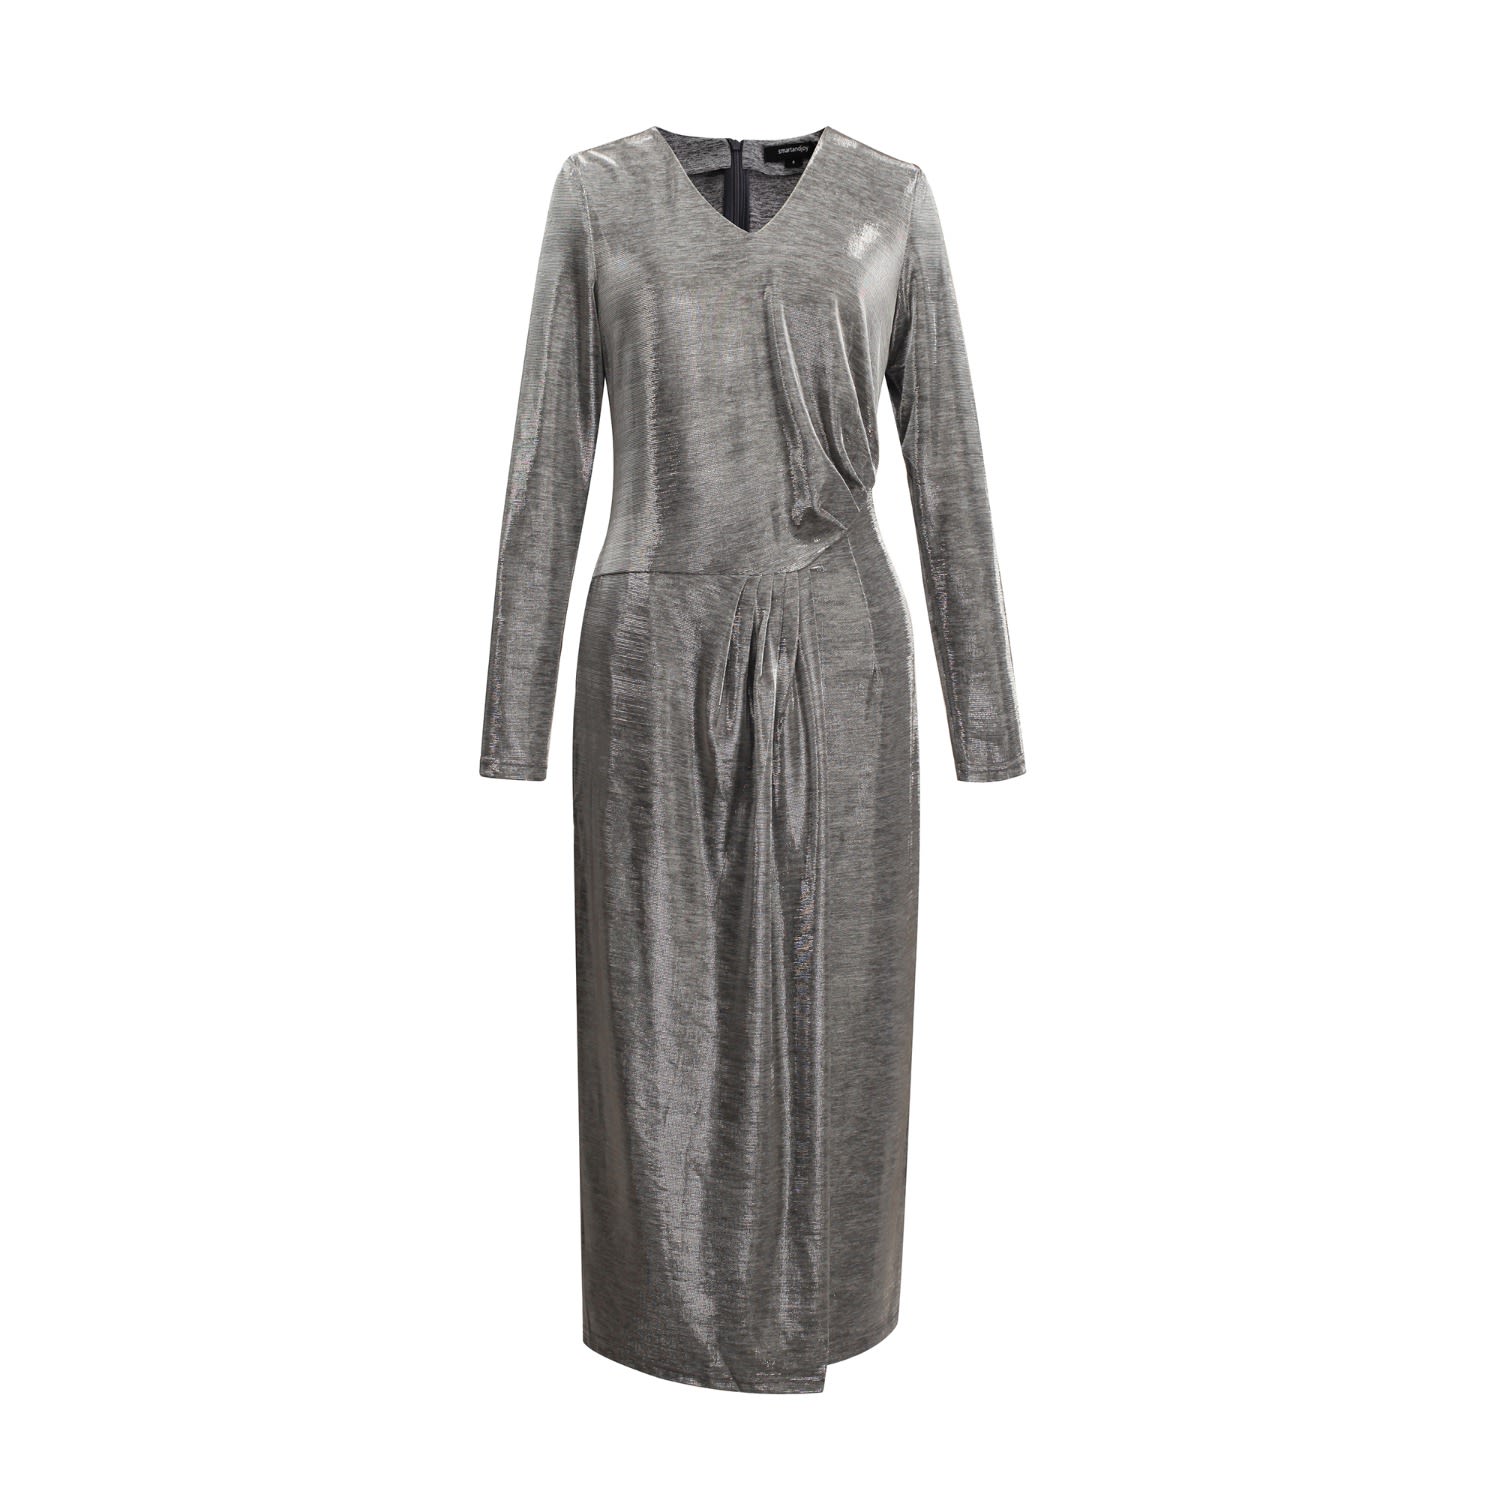 Women’s Grey Asymmetric Rushed Effect Shiny Cocktail Dress Large Smart and Joy